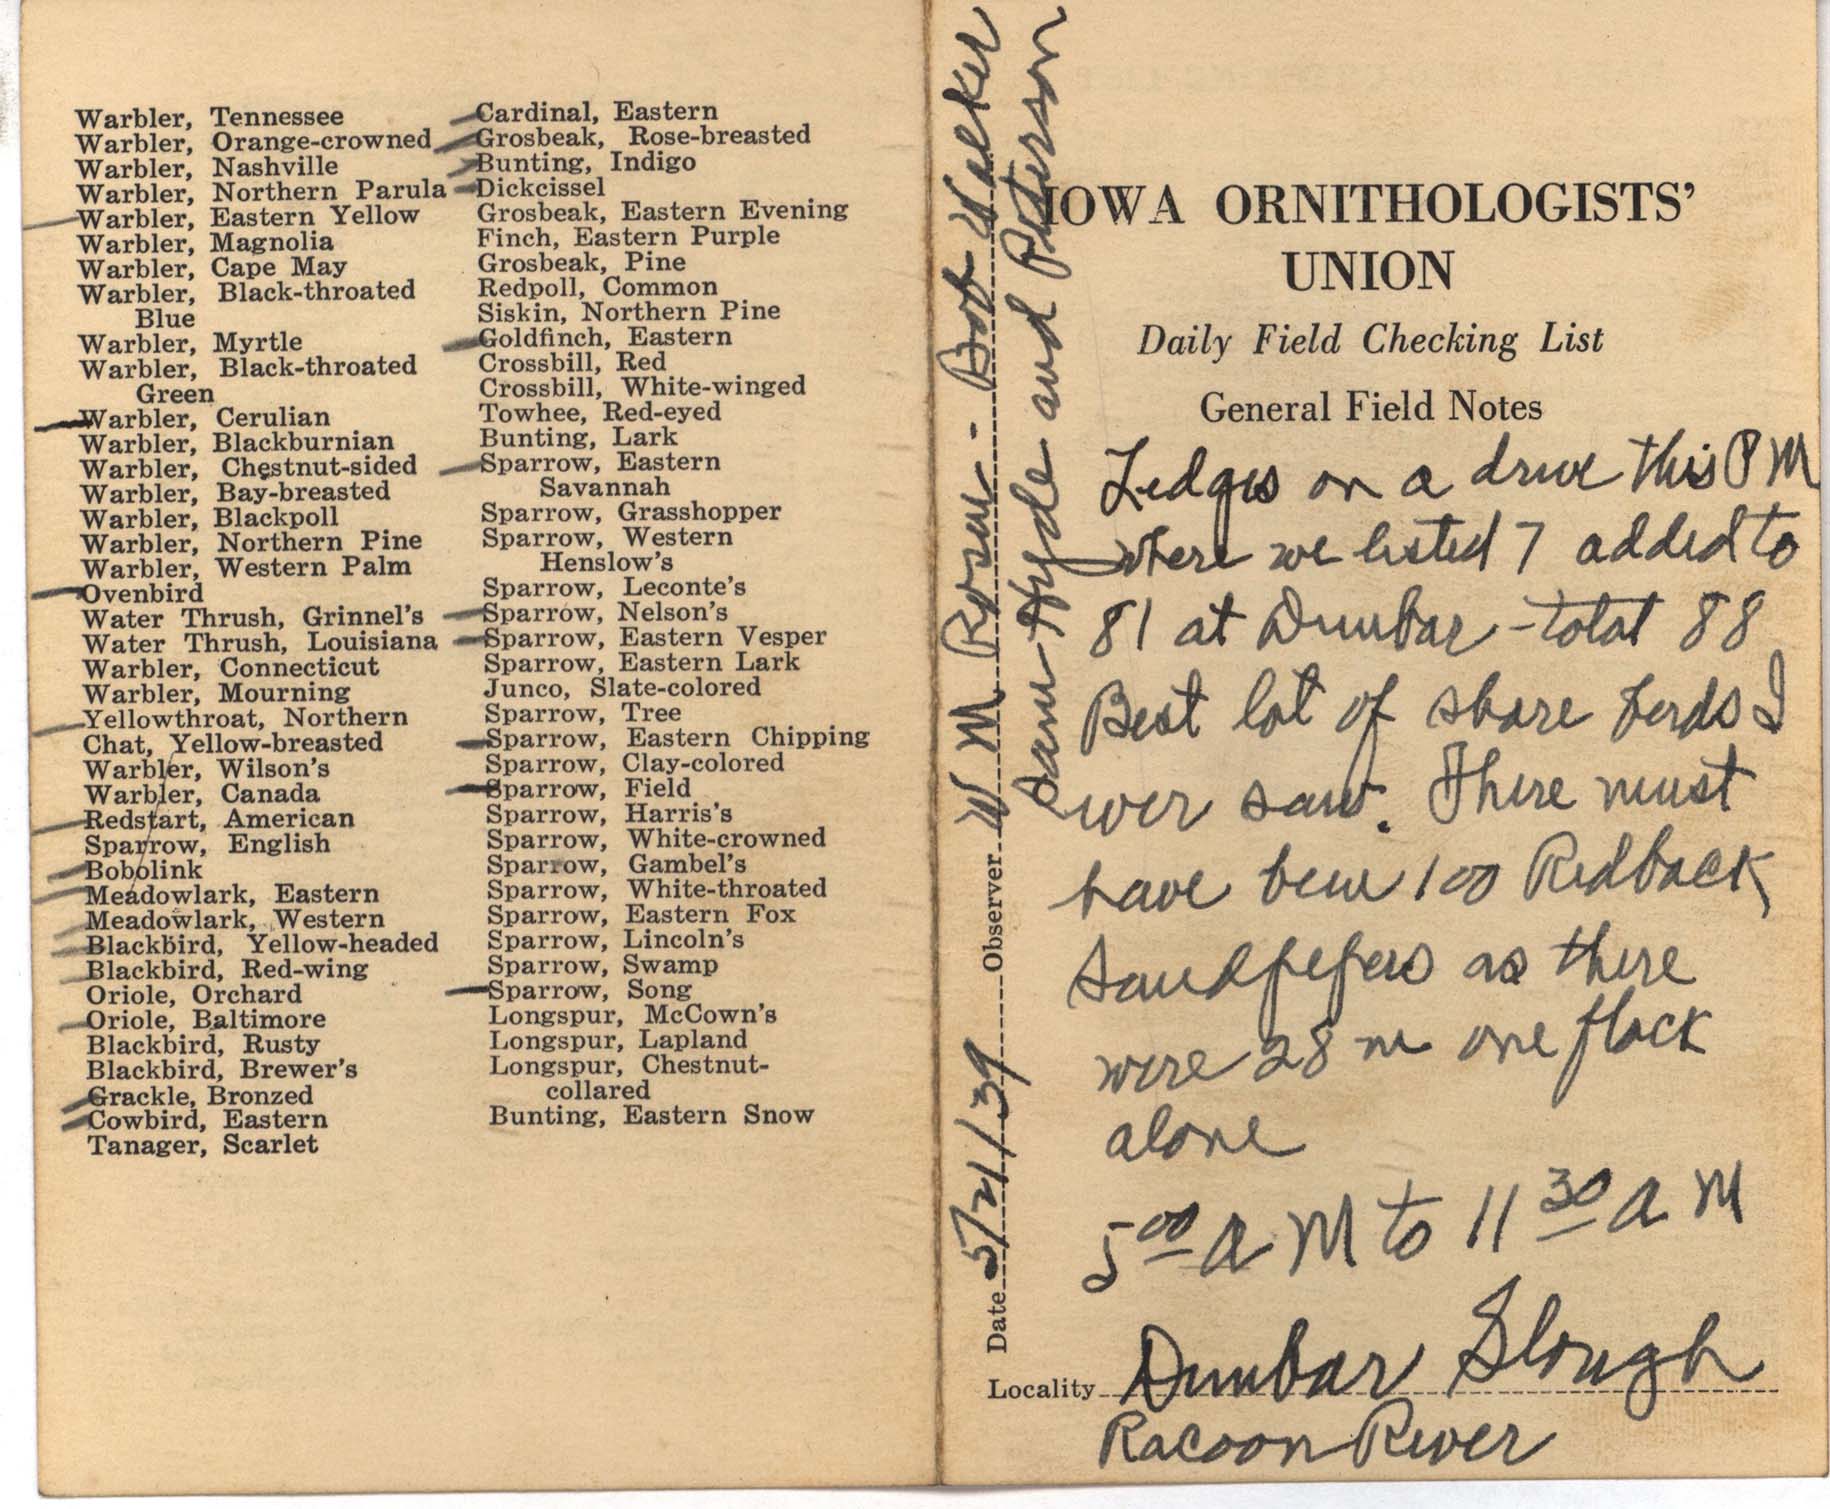 Daily field checking list by Walter Rosene, May 21, 1939